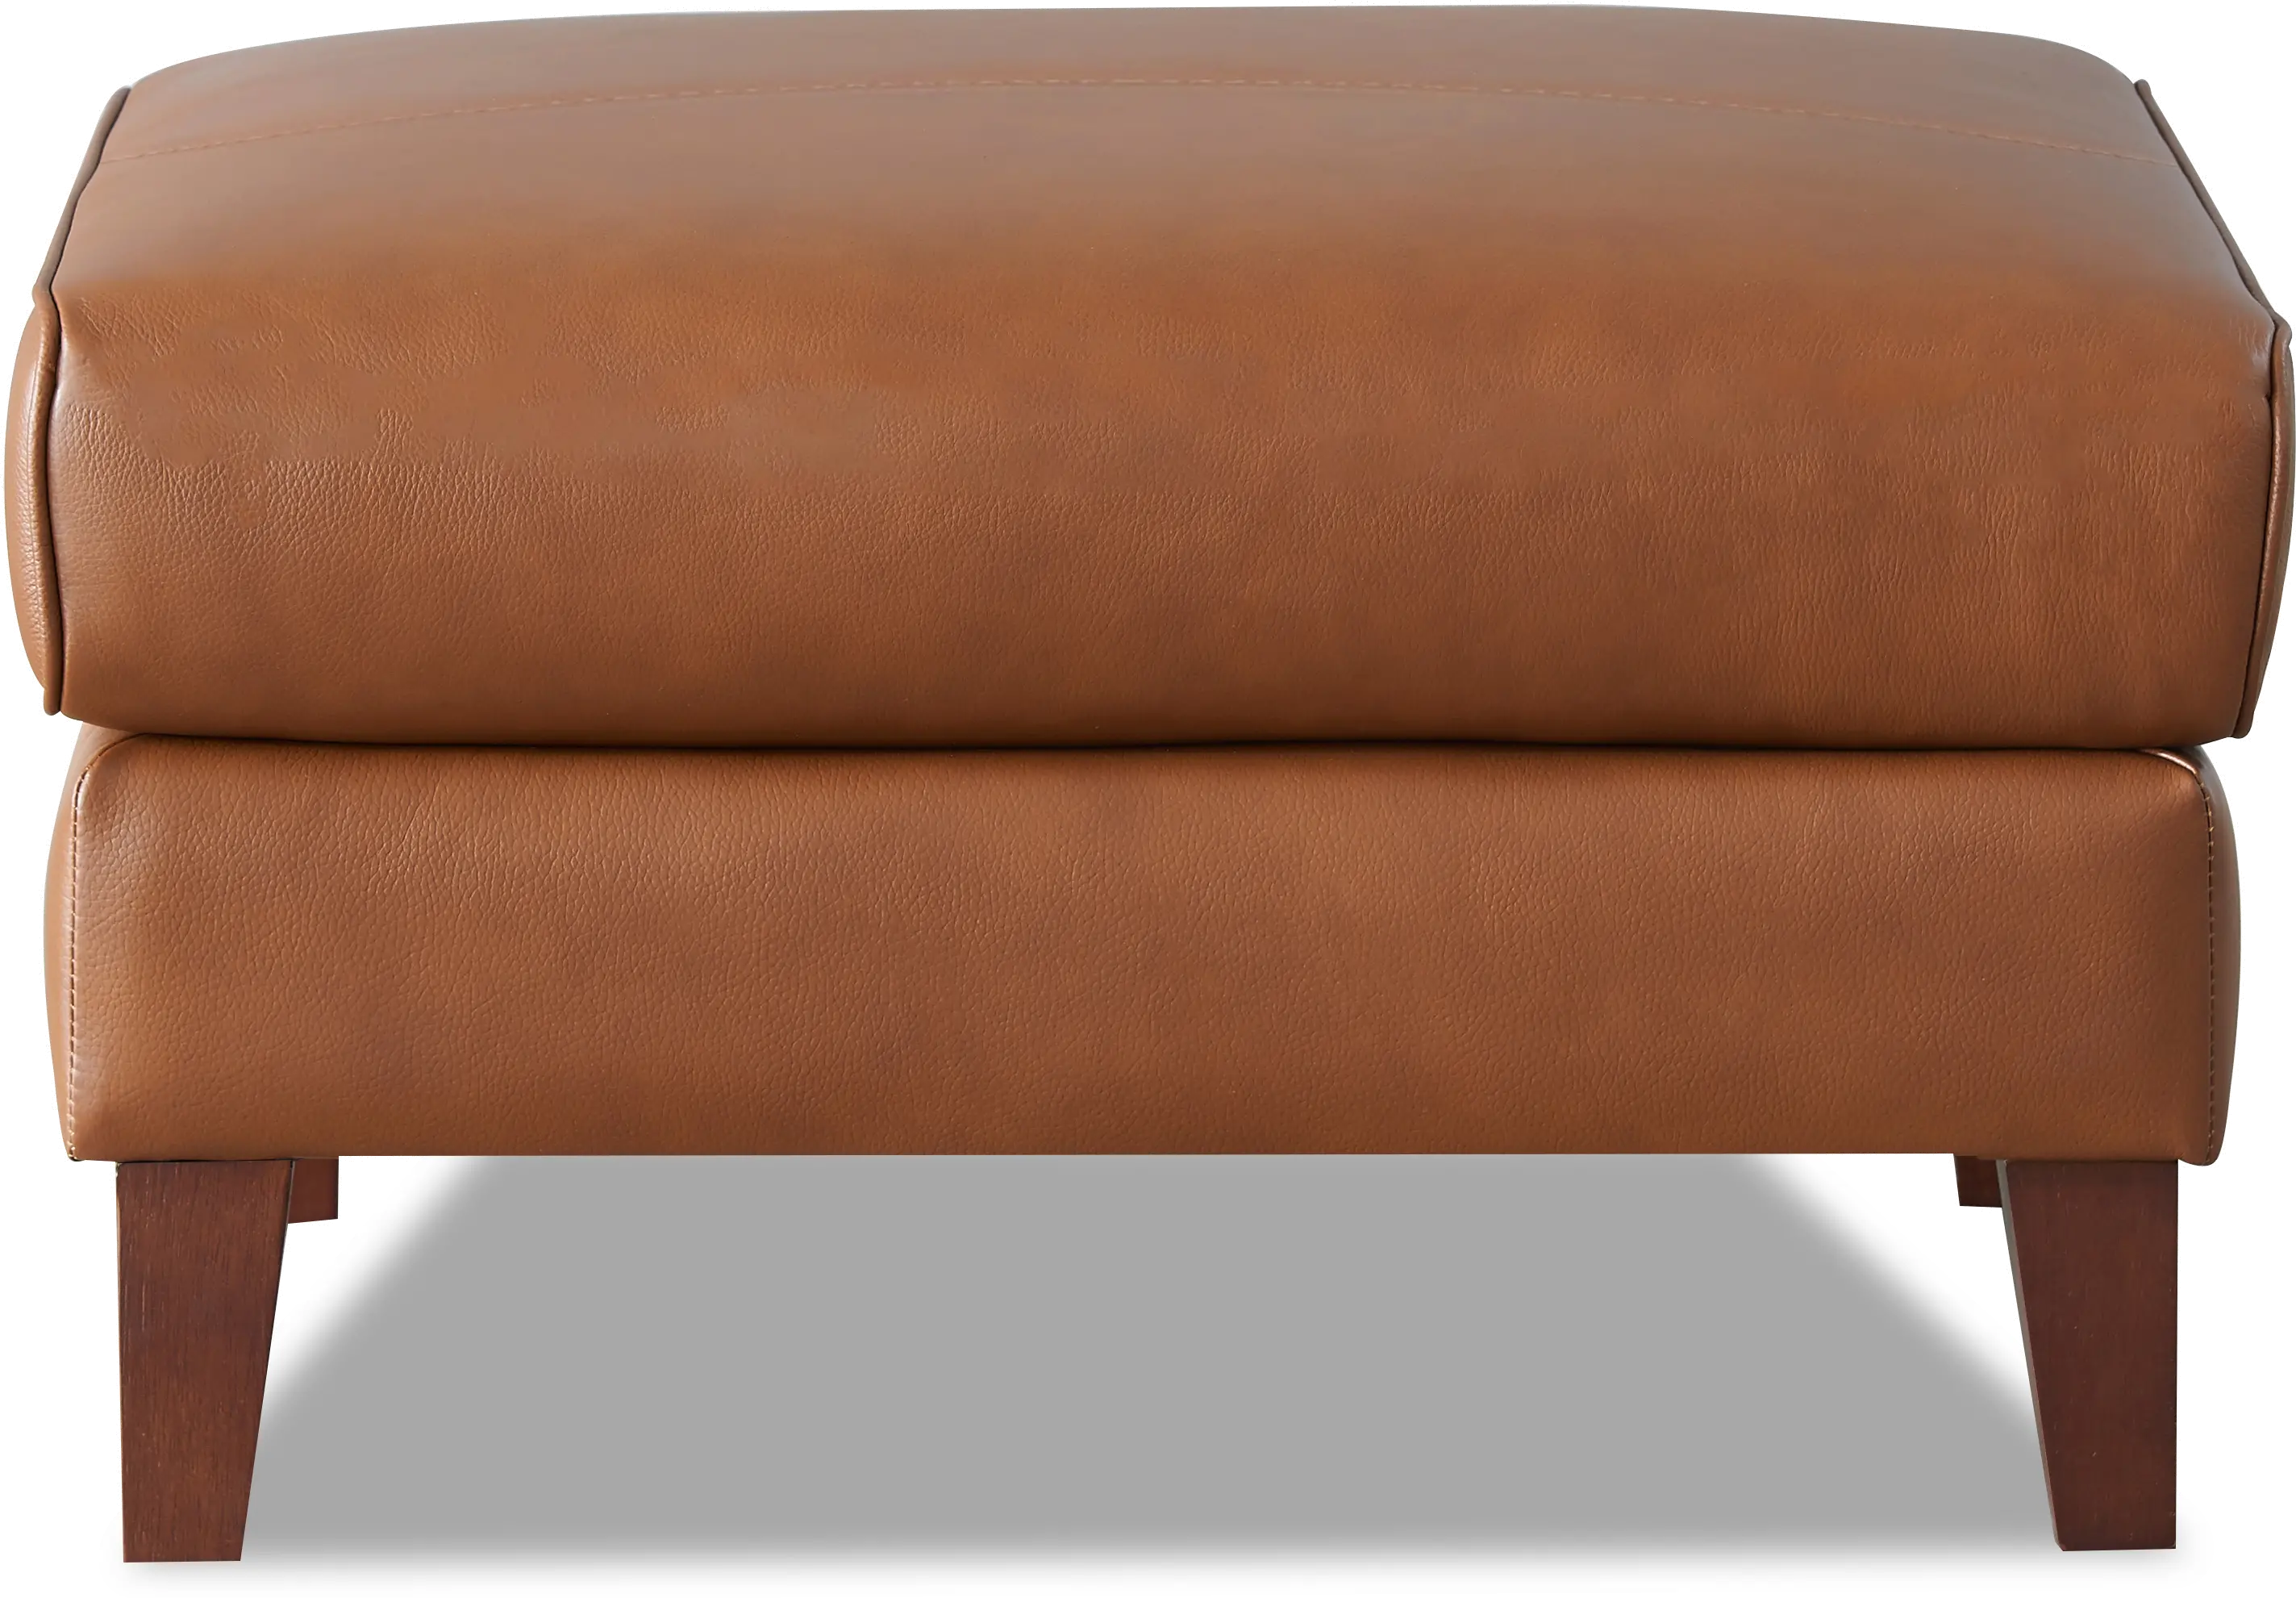 6720-00-2362 Pacer Nutmeg Top Grain Leather Ottoman - Amax Leat sku 6720-00-2362